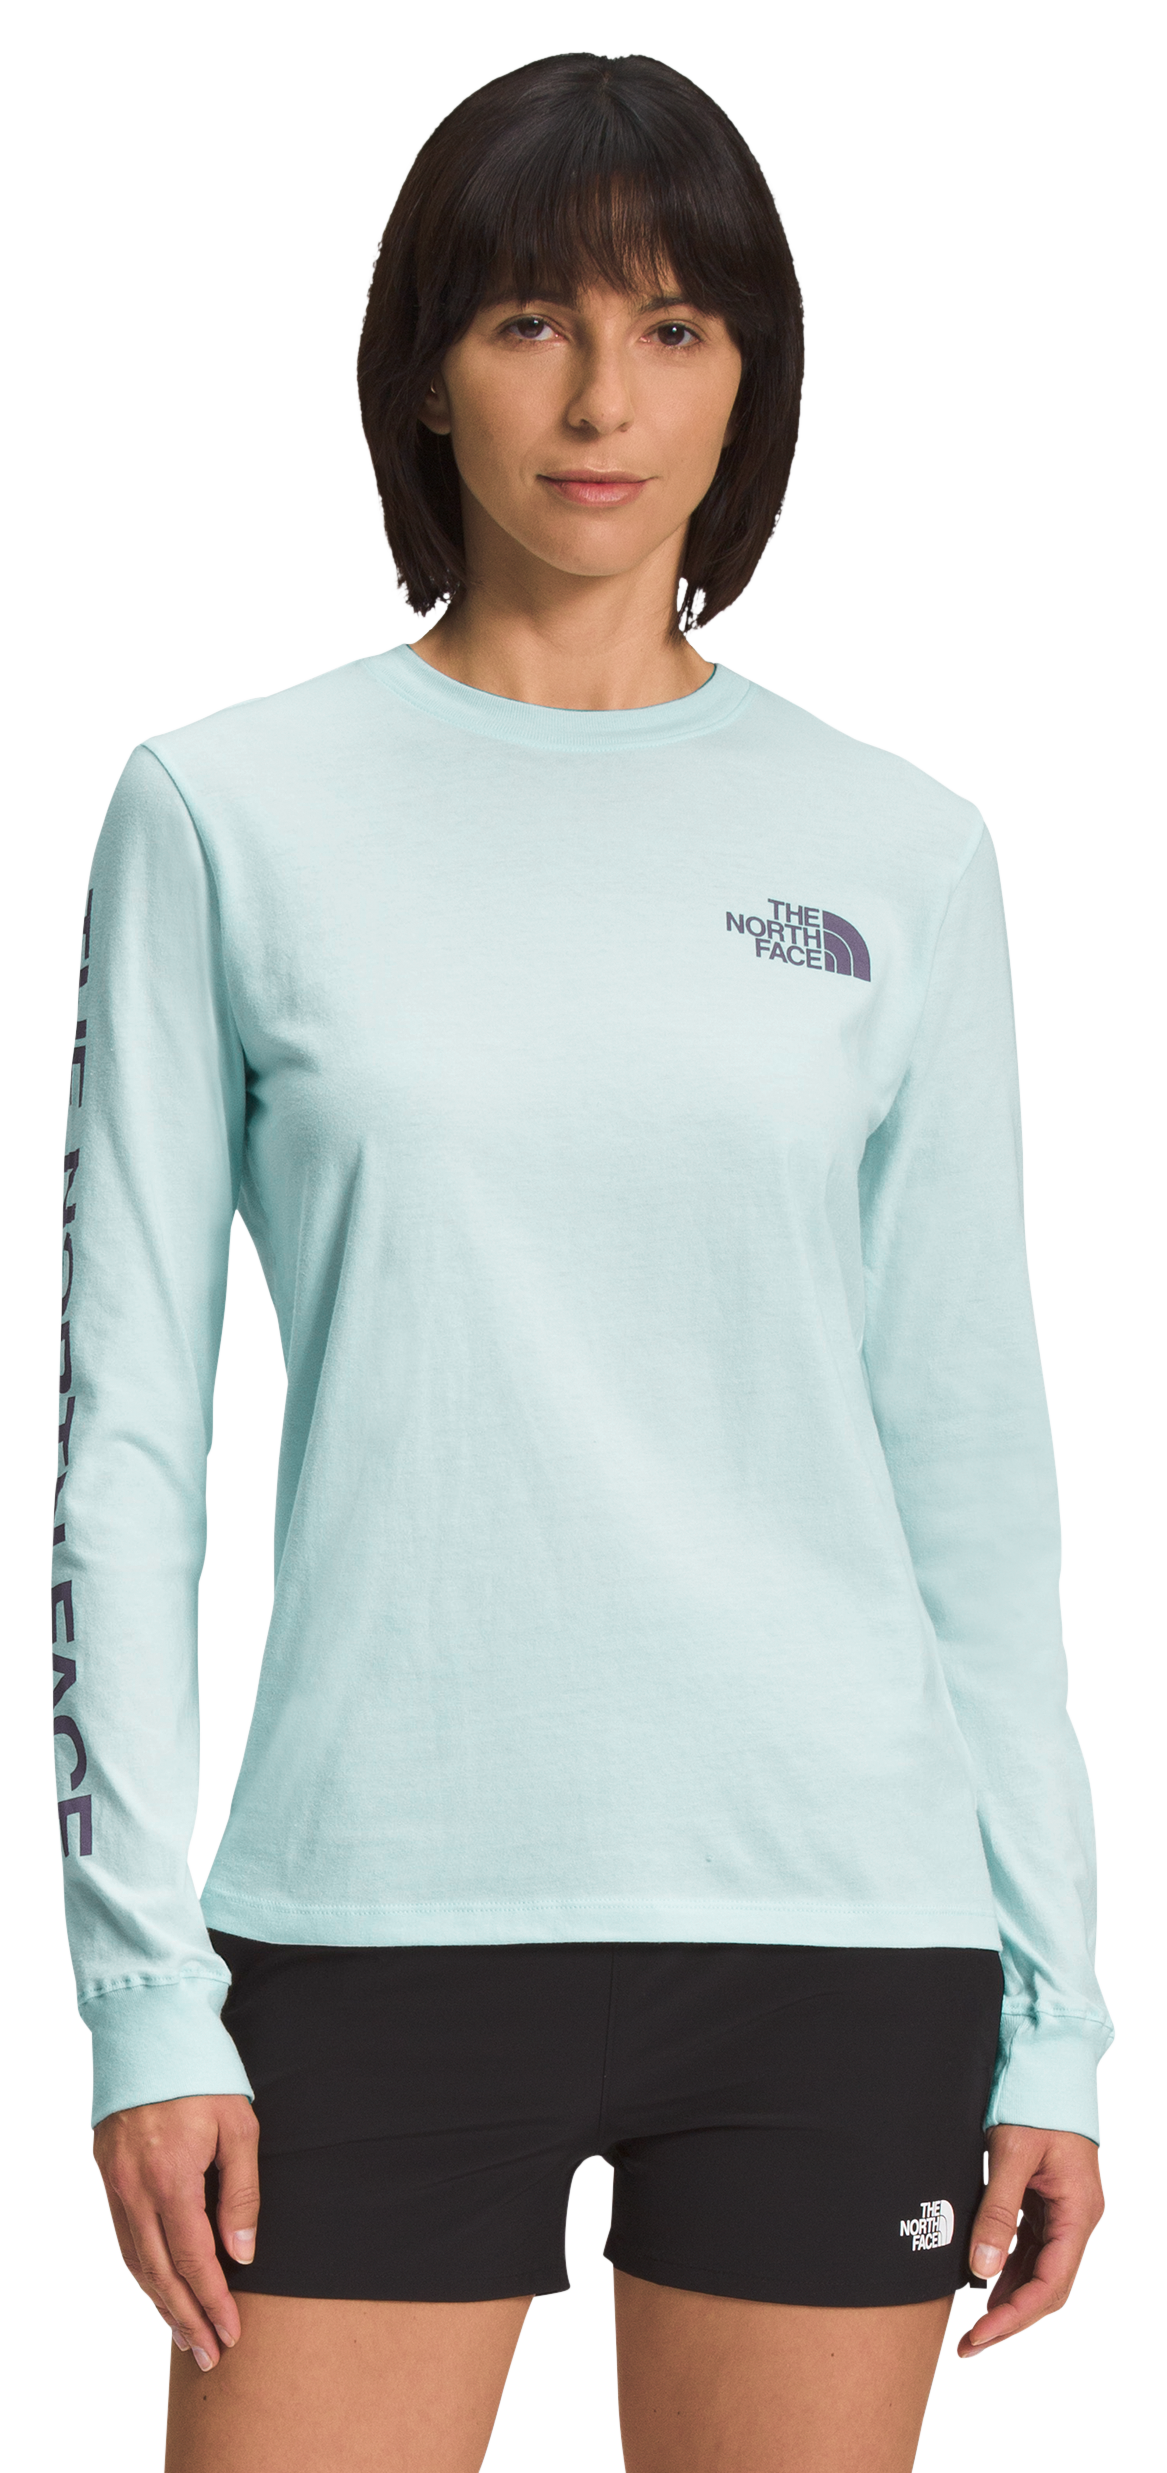 The North Face Hit Graphic Long-Sleeve T-Shirt for Ladies - Skylight Blue/Lunar Slate - M